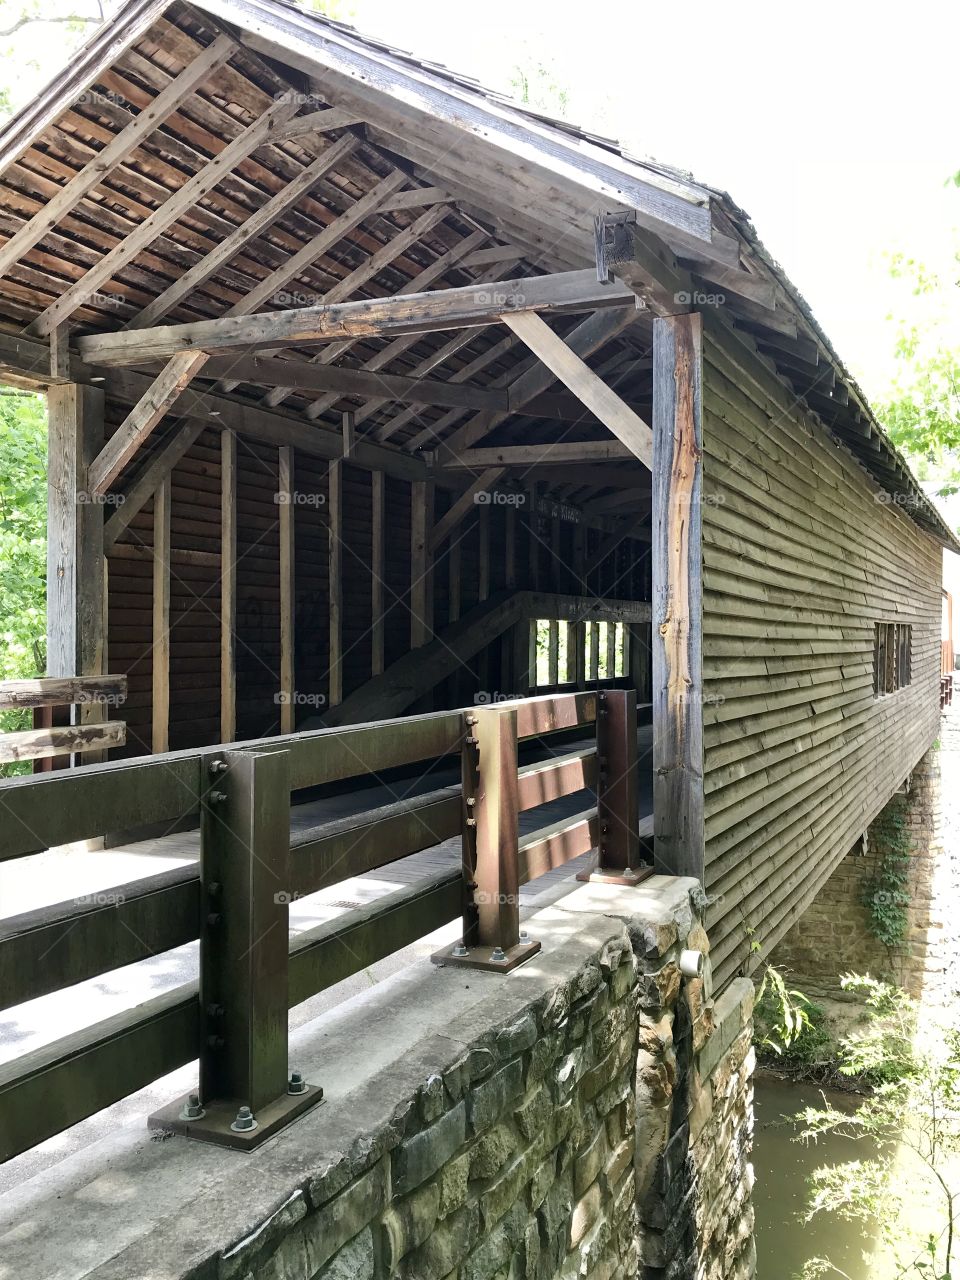 Covered Bridge discovered while exploring the countryside 